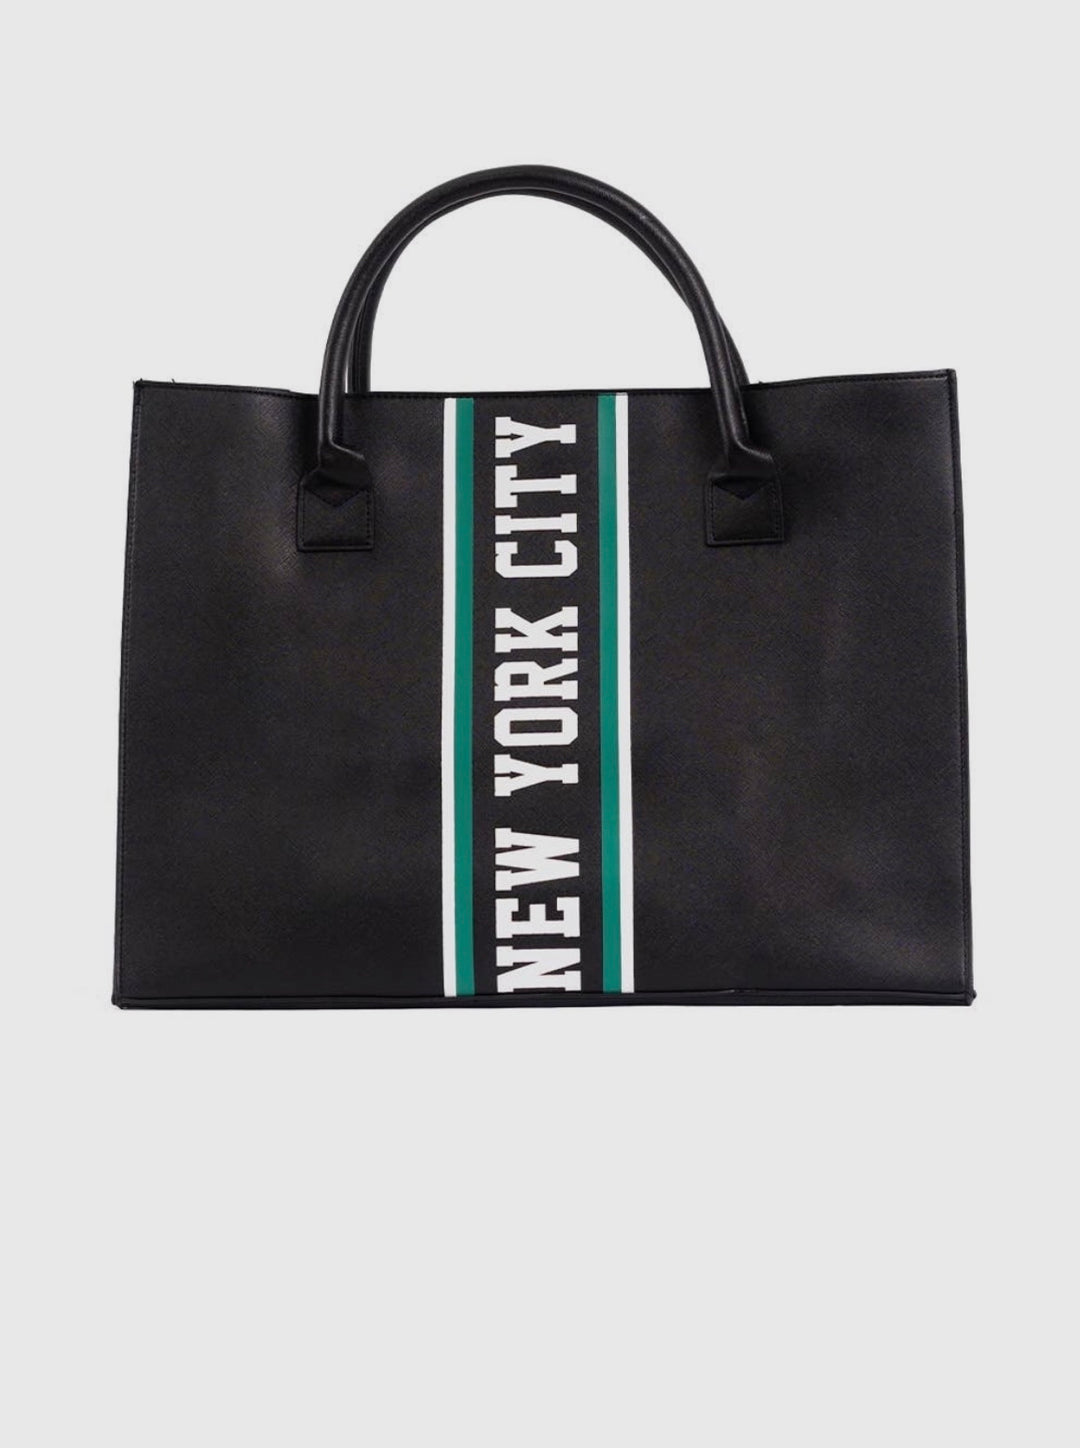 From Los Angeles To New York City Tote Bag (Black)